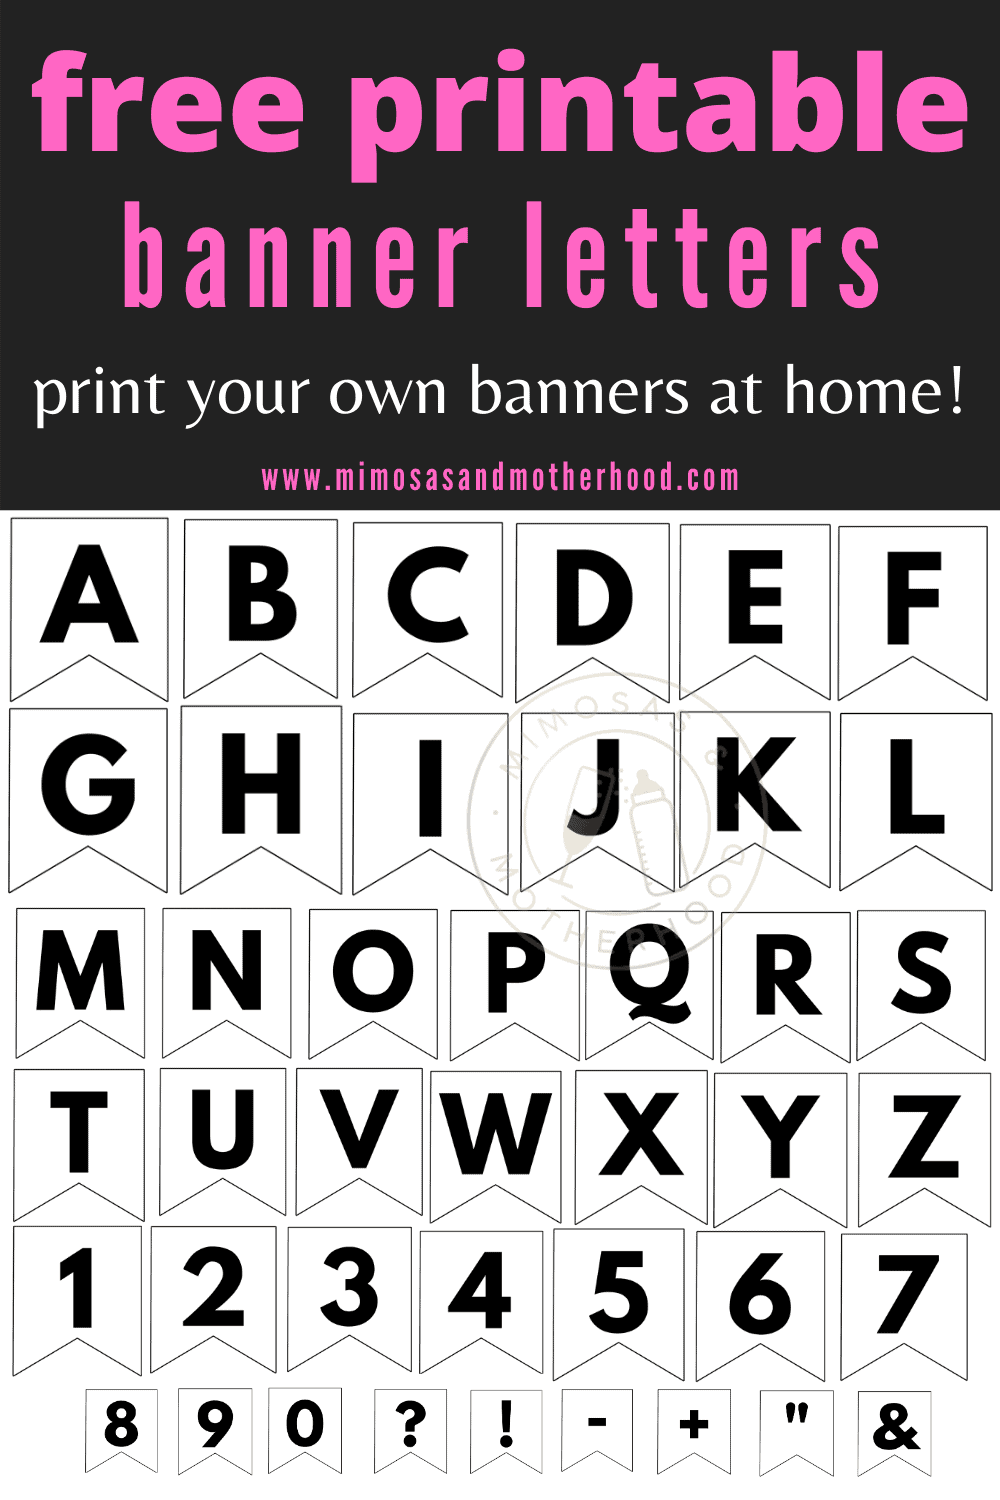 Free Printable ABC Banner Letters Template - Mimosas & Motherhood Within Letter Templates For Banners